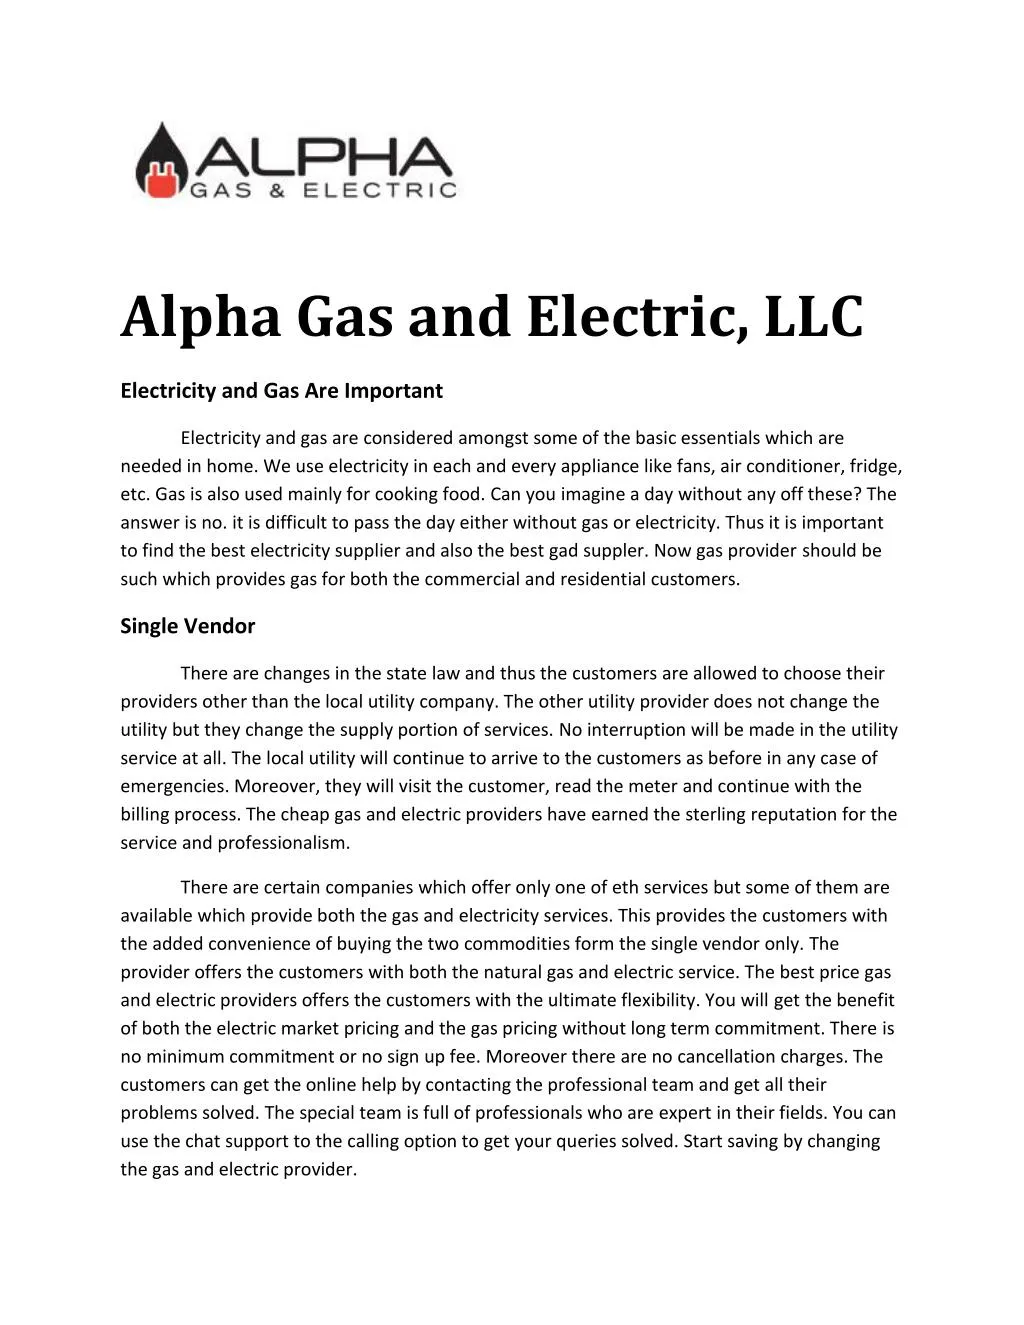 alpha gas and electric llc electricity